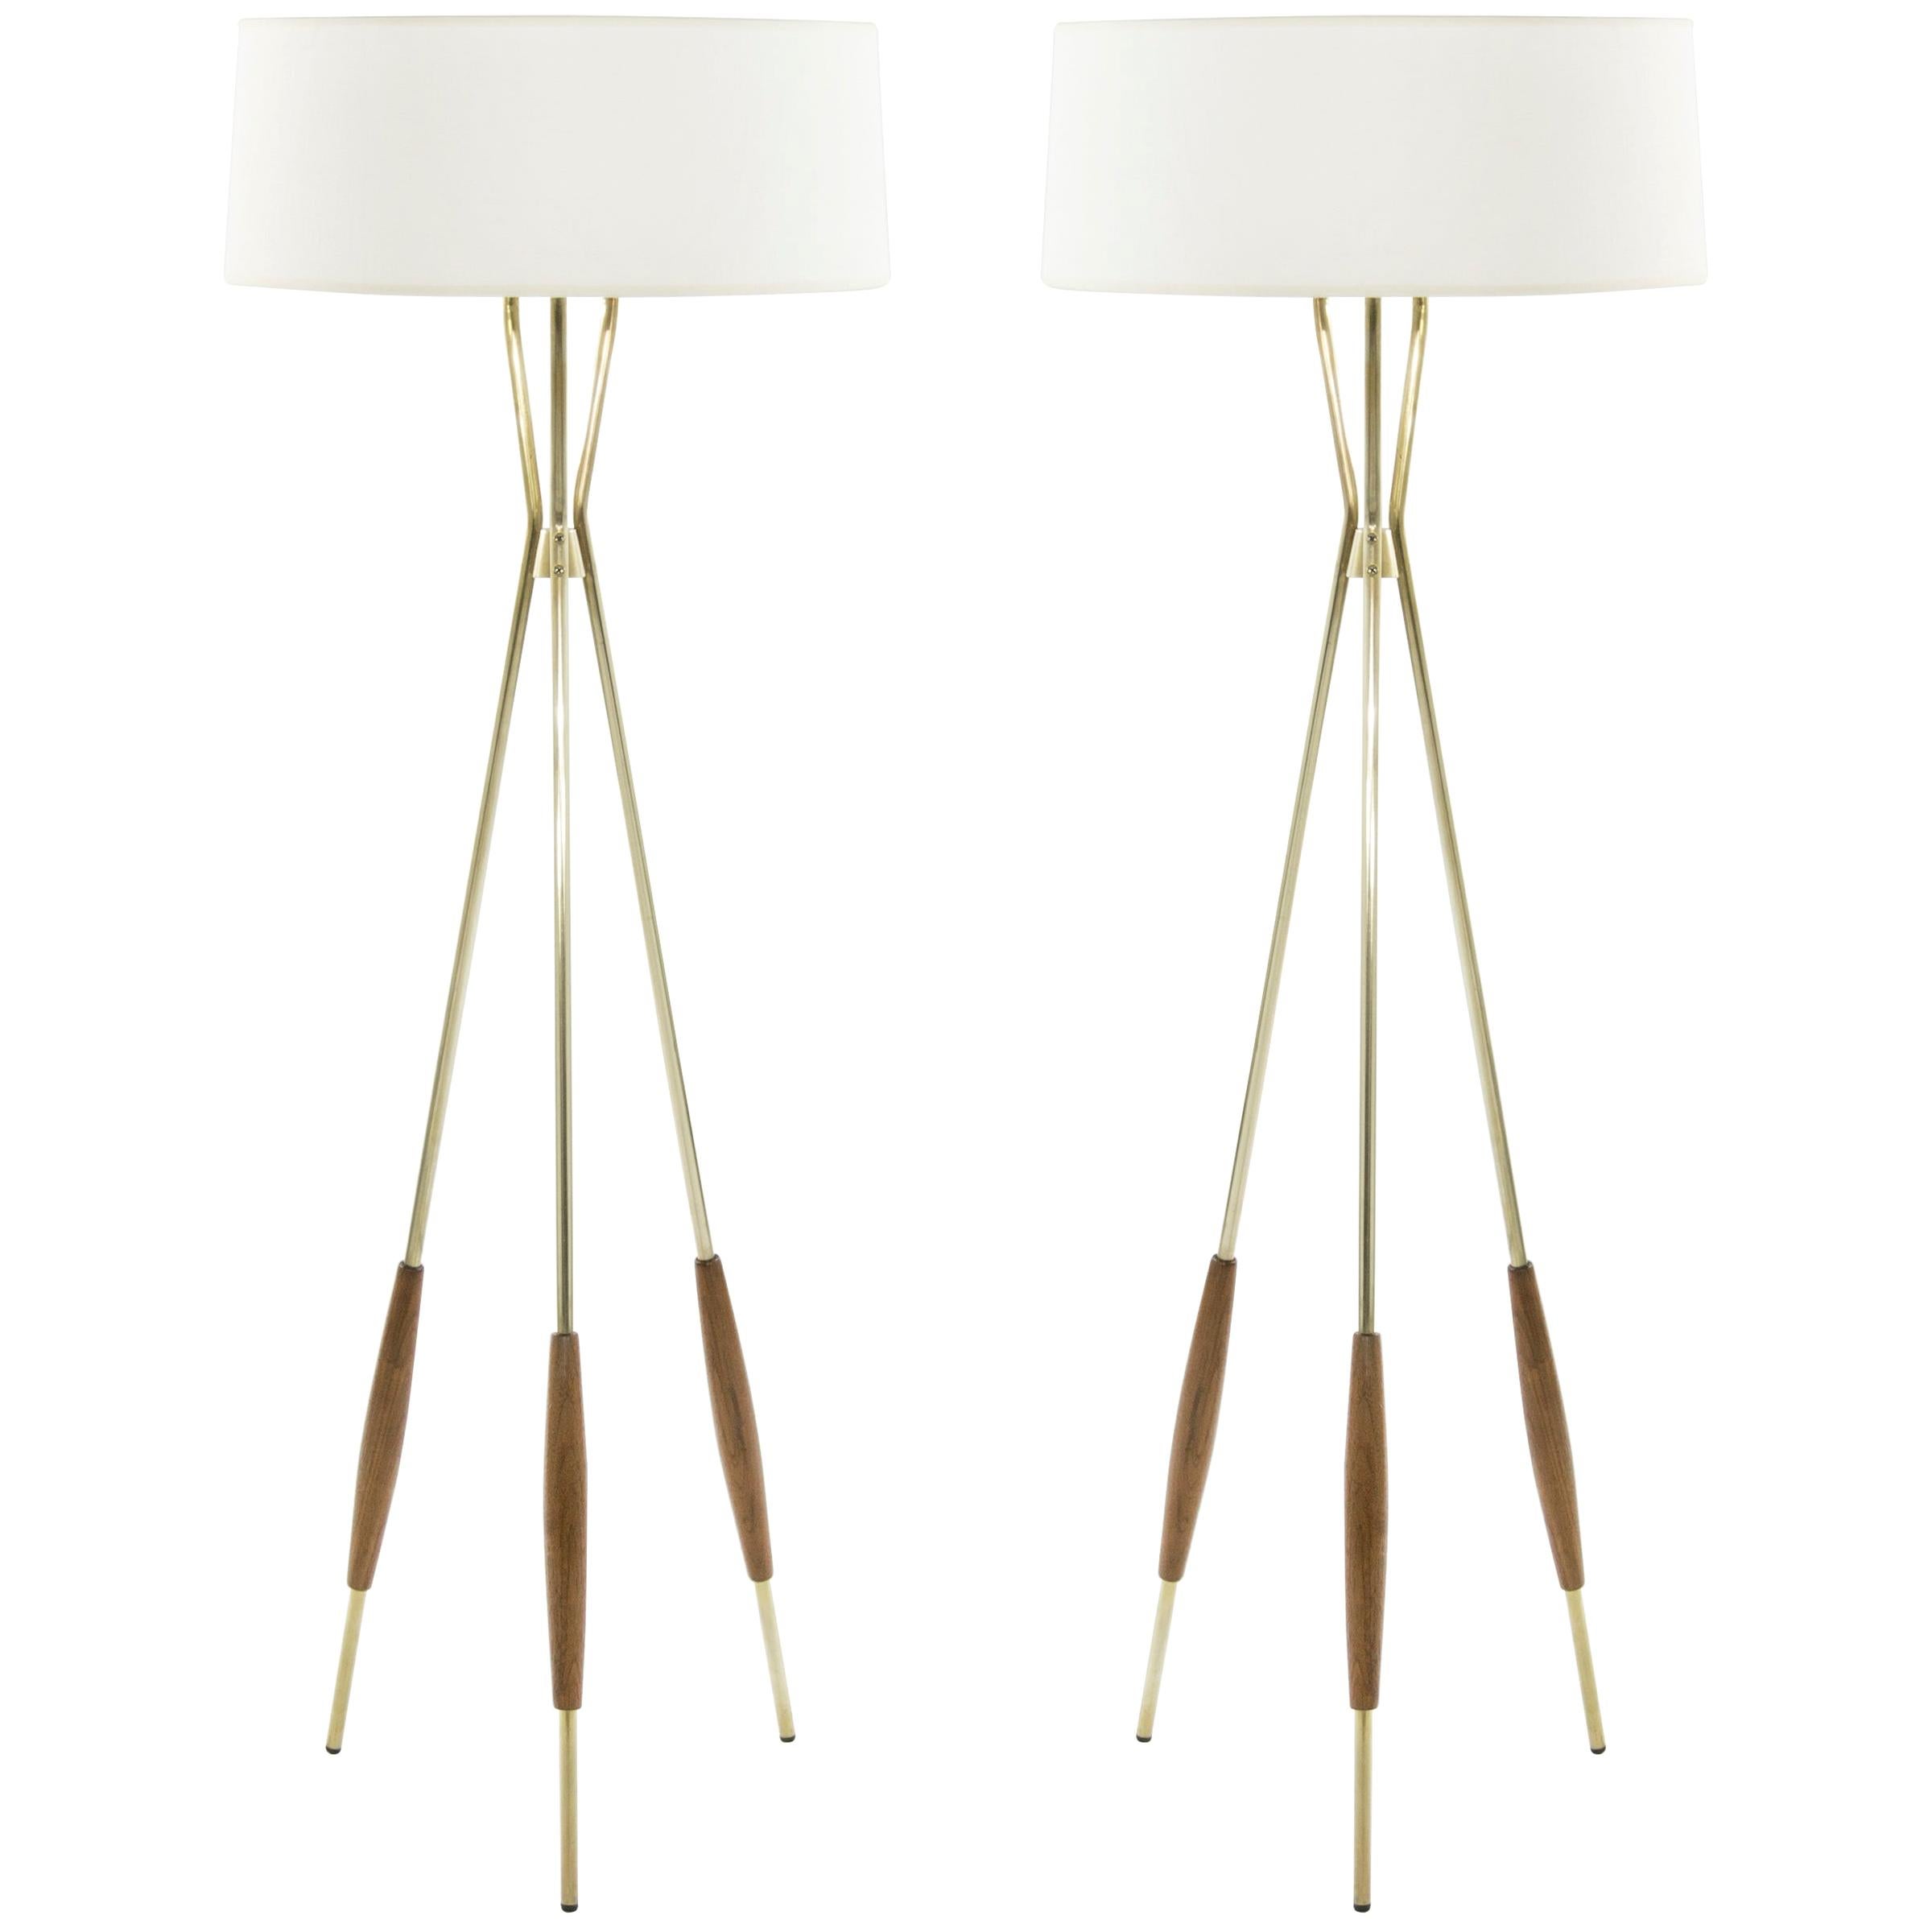 Pair of Brass and Walnut Tripod Floor Lamps by Gerald Thurston, 1960s